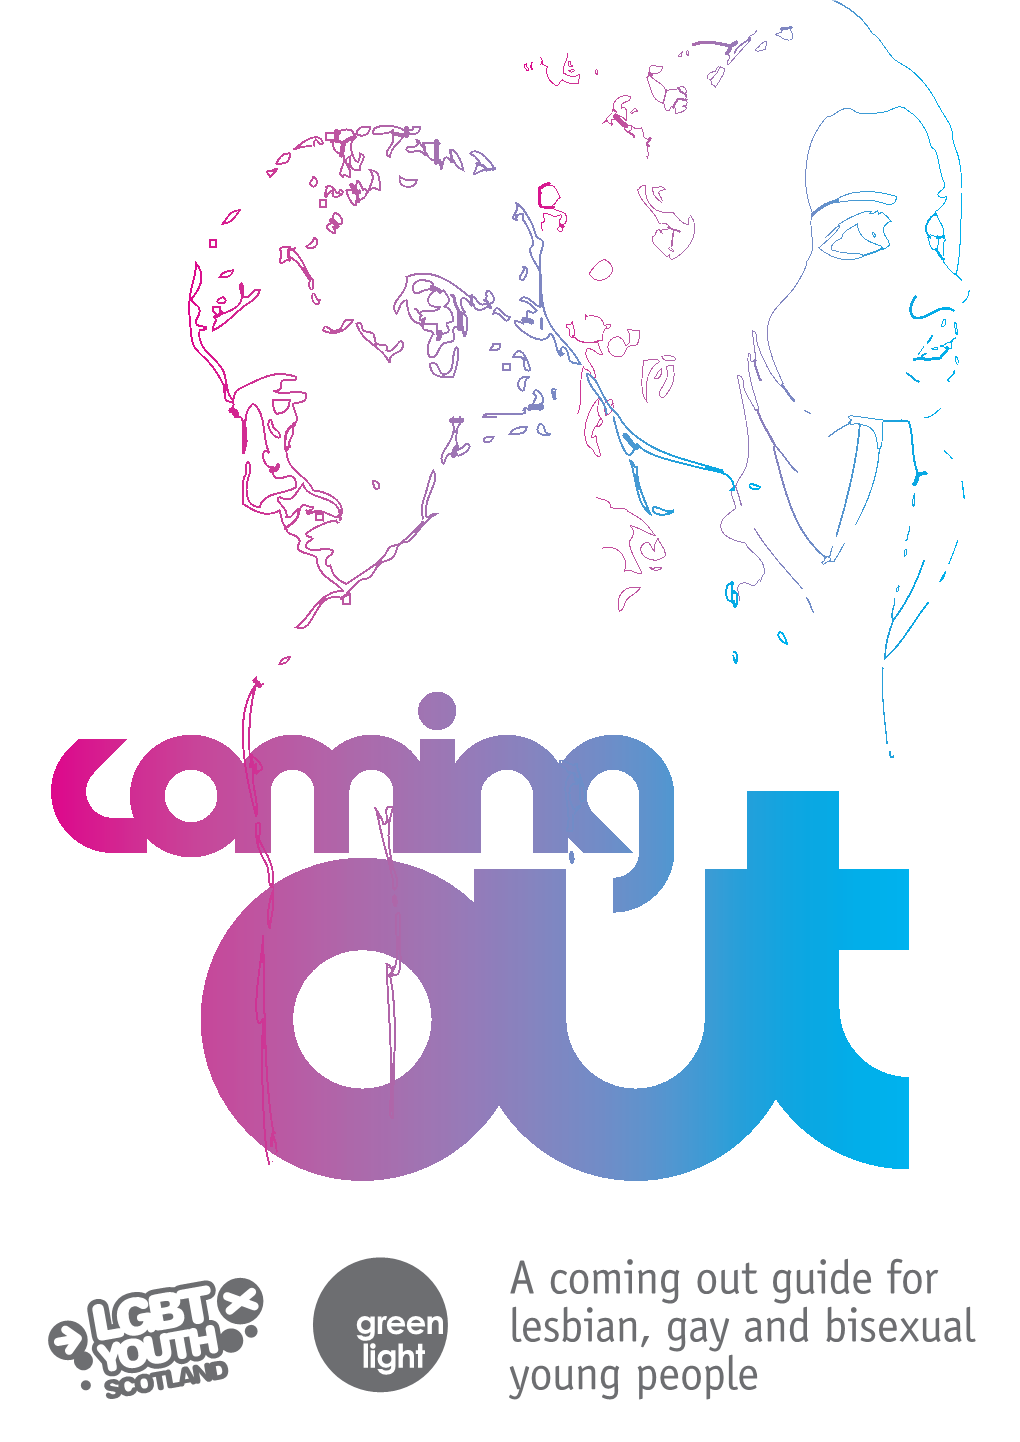 A Coming out Guide for Lesbian, Gay and Bisexual Young People